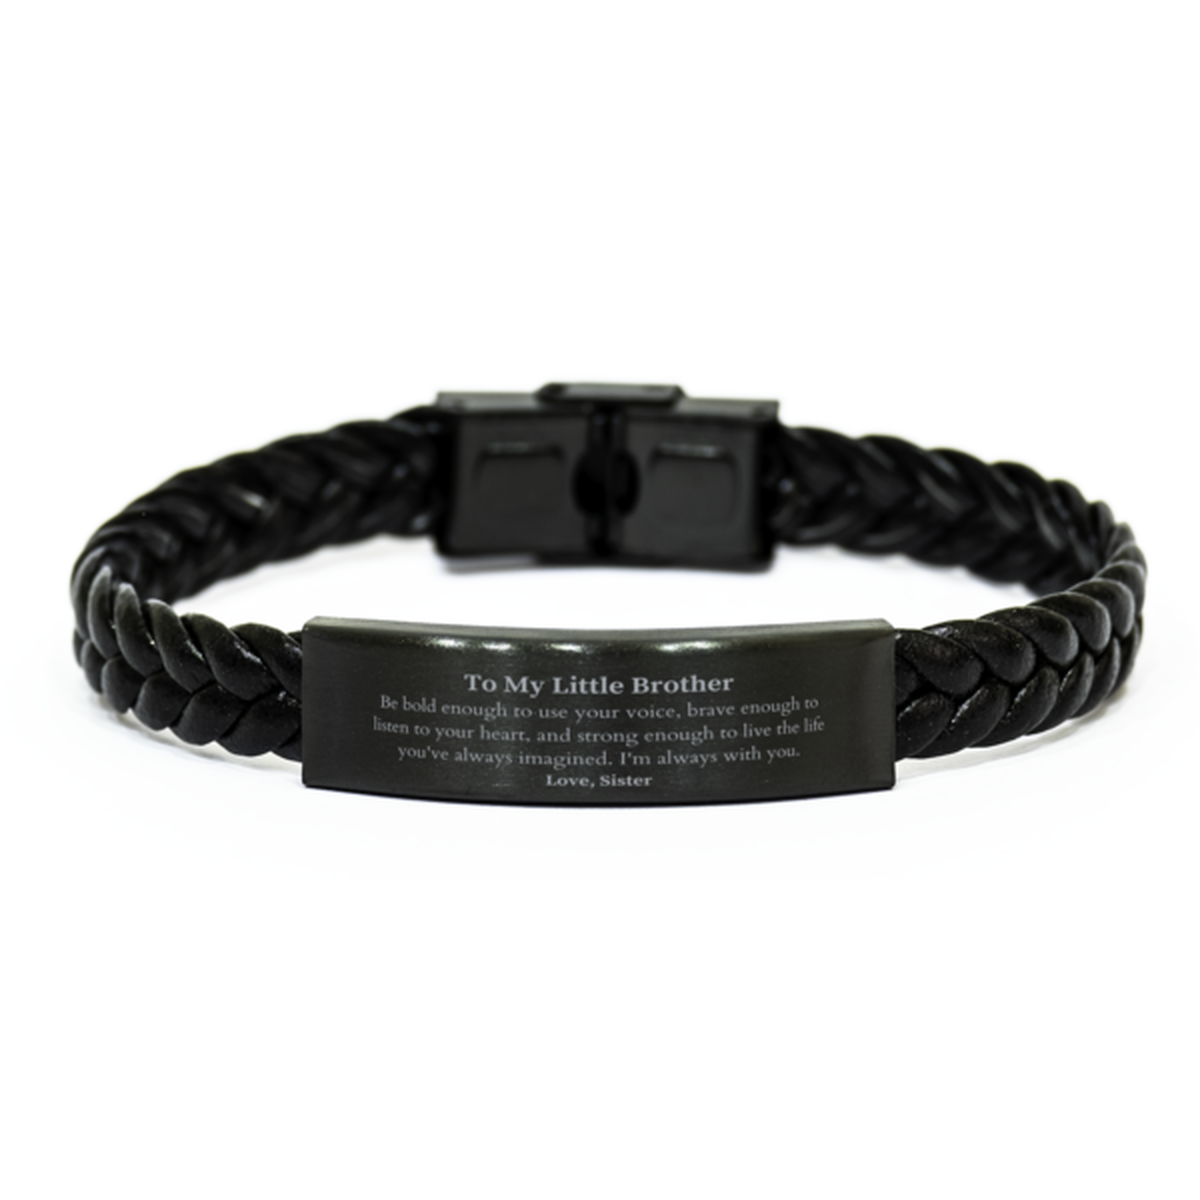 Keepsake Little Brother Braided Leather Bracelet Gift Idea Graduation Christmas Birthday Little Brother from Sister, Little Brother Be bold enough to use your voice, brave enough to listen to your heart. Love, Sister